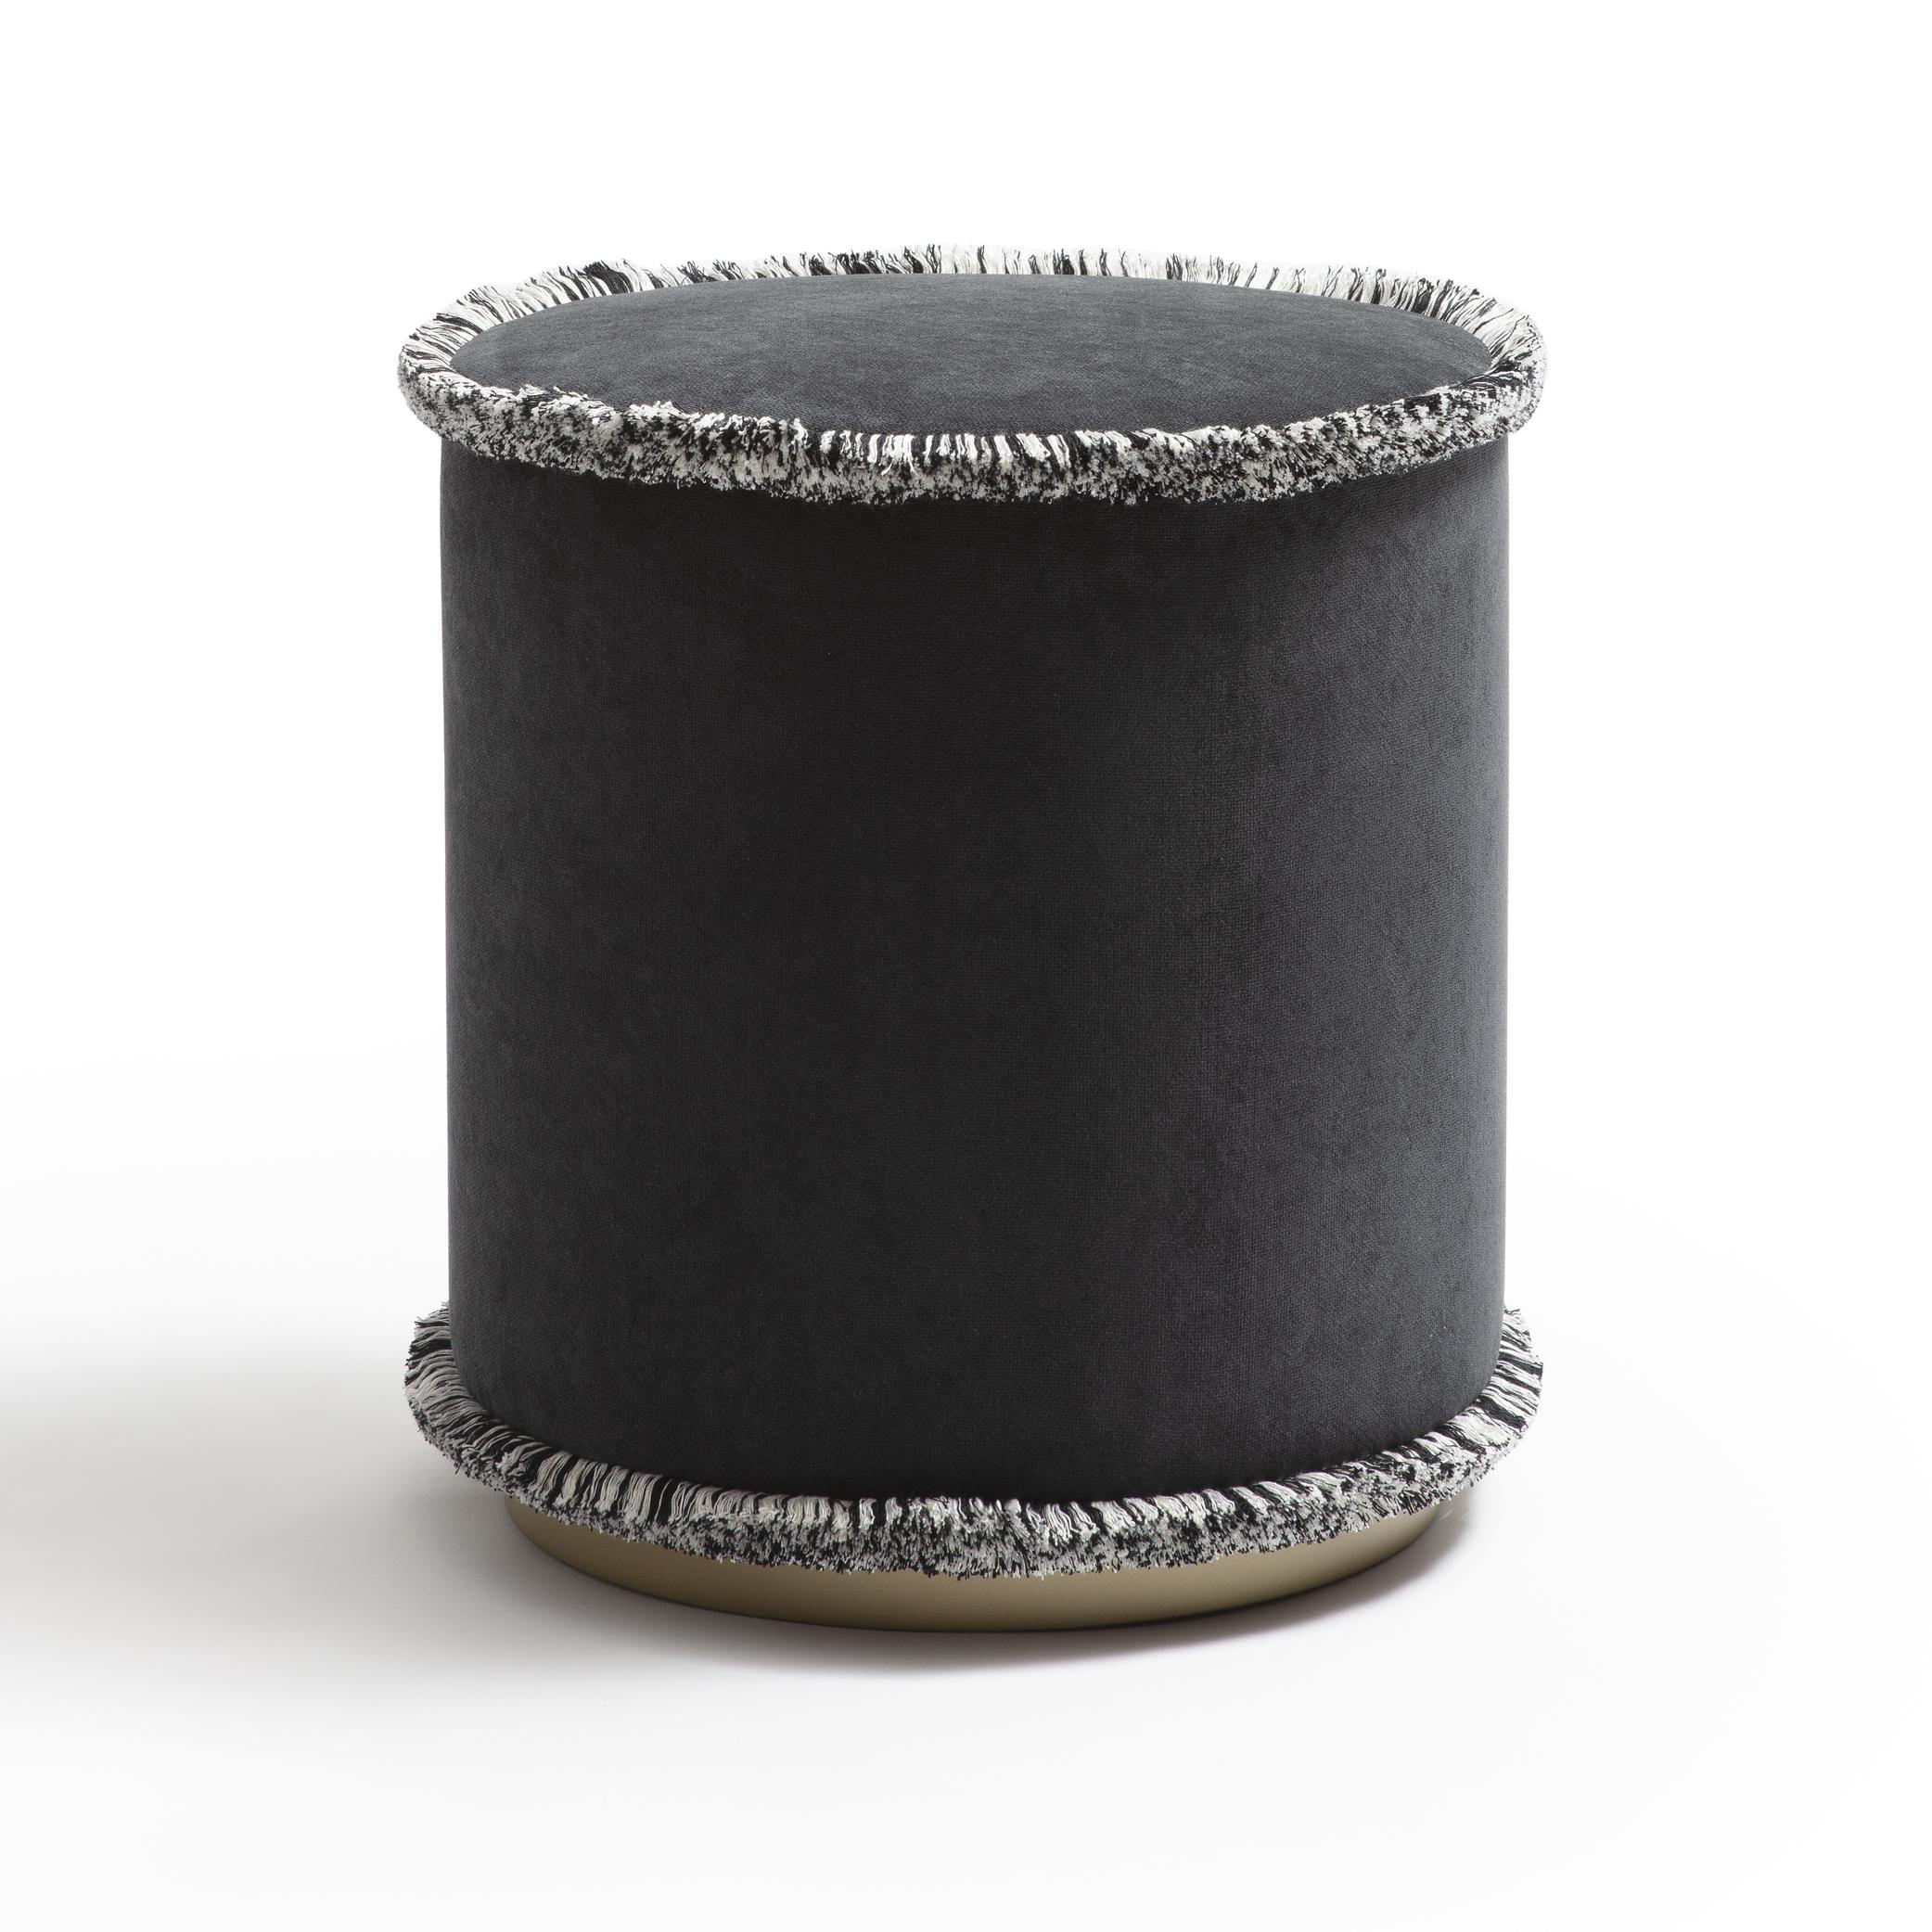 IL Pouf  Salt & Pepper is the black velvet pouf with a refined limited edition mélange Salt & Pepper fringe. Unique in its style and numbered one by one, the black and white fringes outline the round perimeter of the seat and of the bottom of the